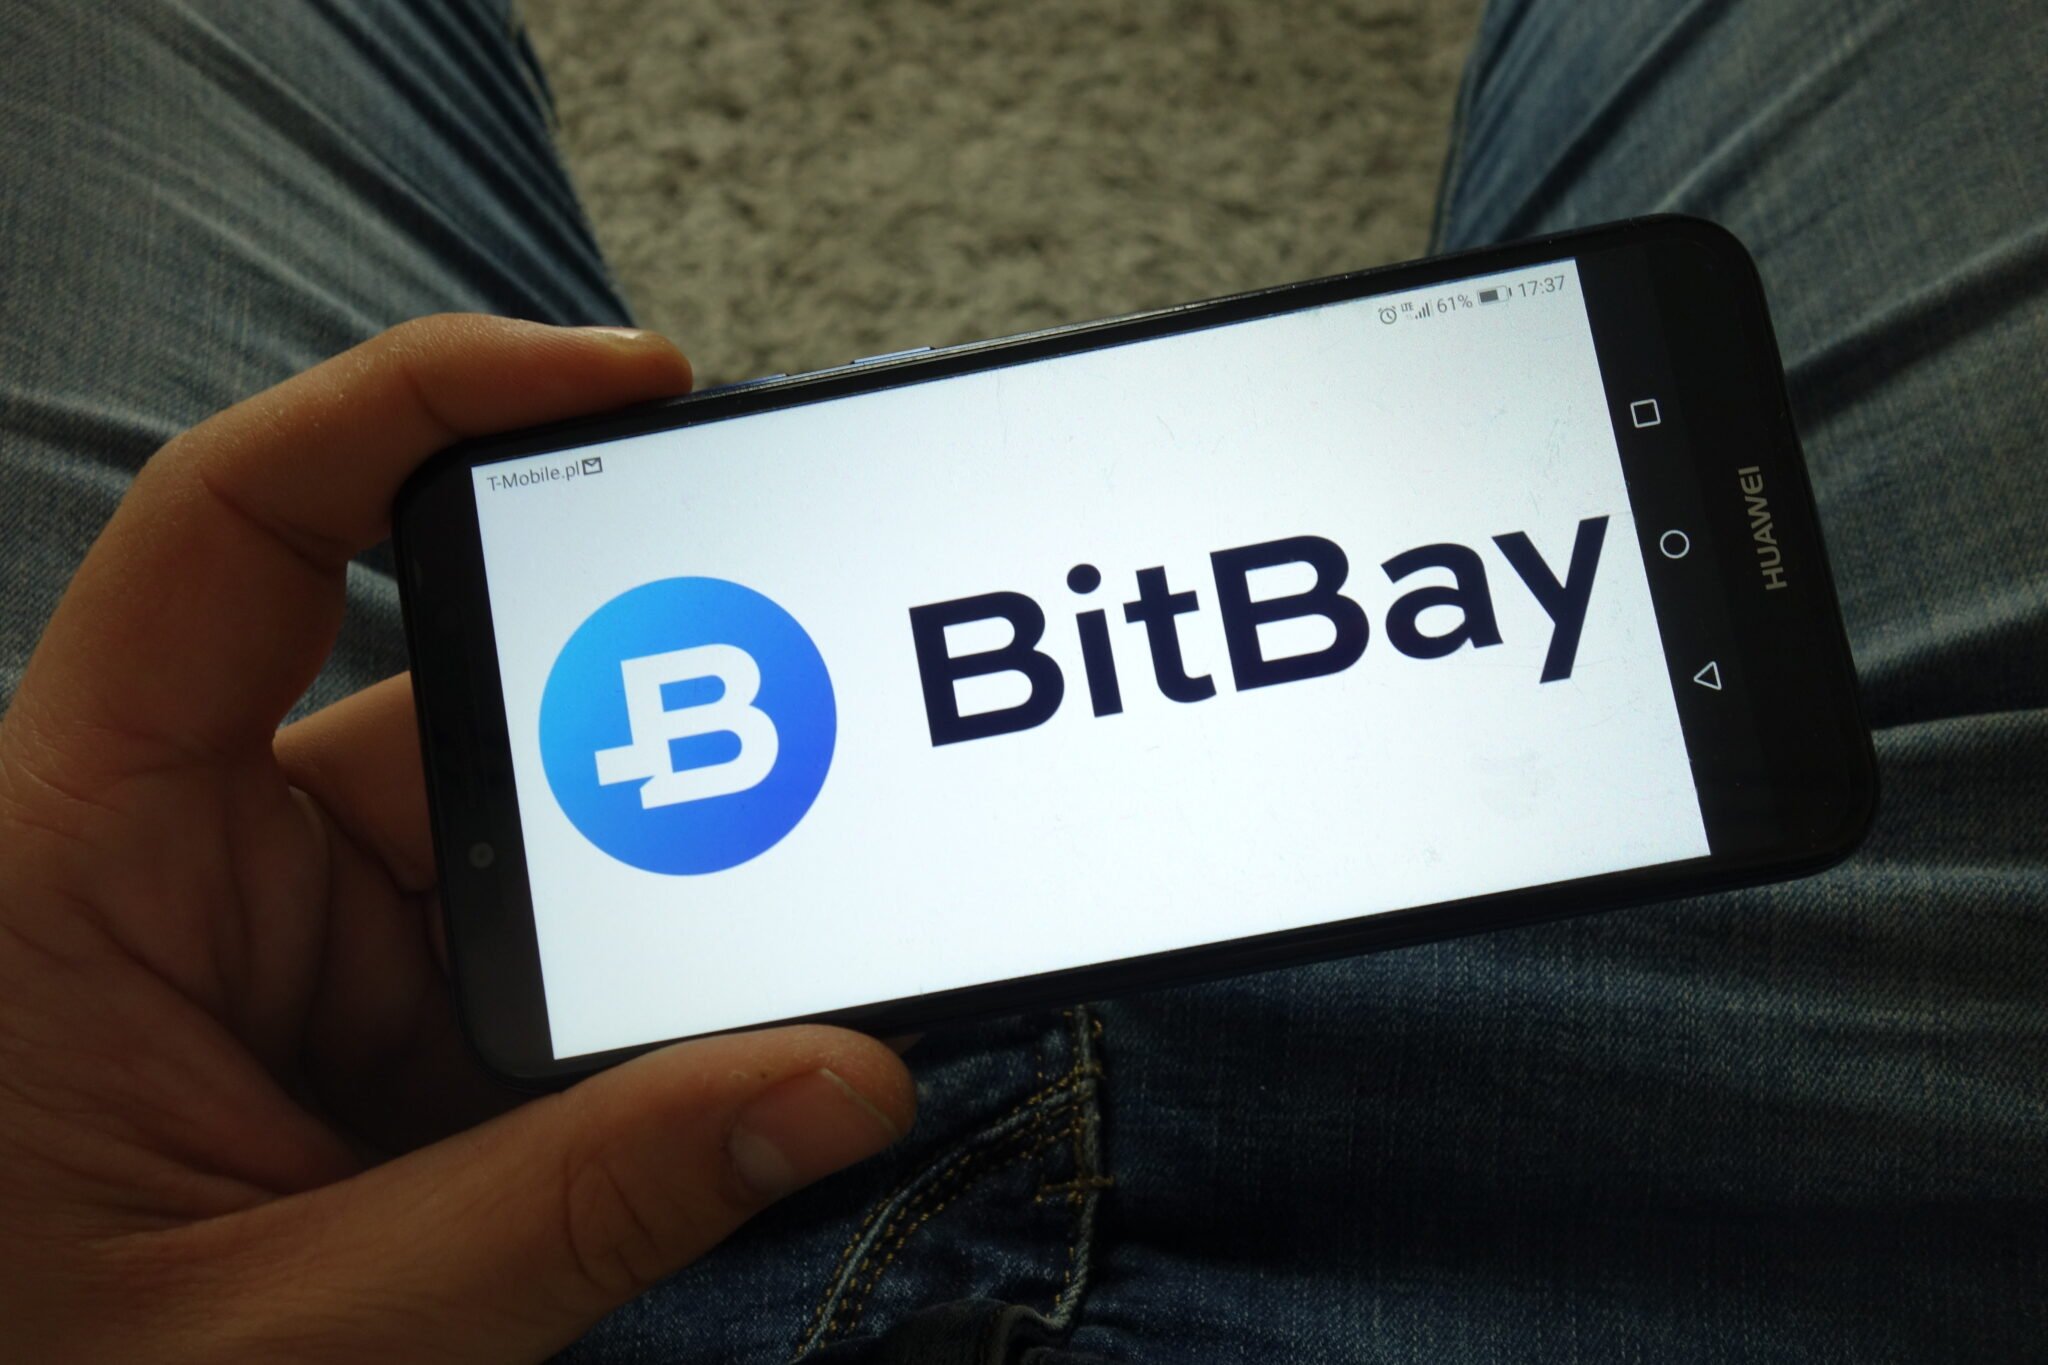 KONSKIE, POLAND - March 31, 2019: Man holding smartphone with BitBay cryptocurrency exchange logo